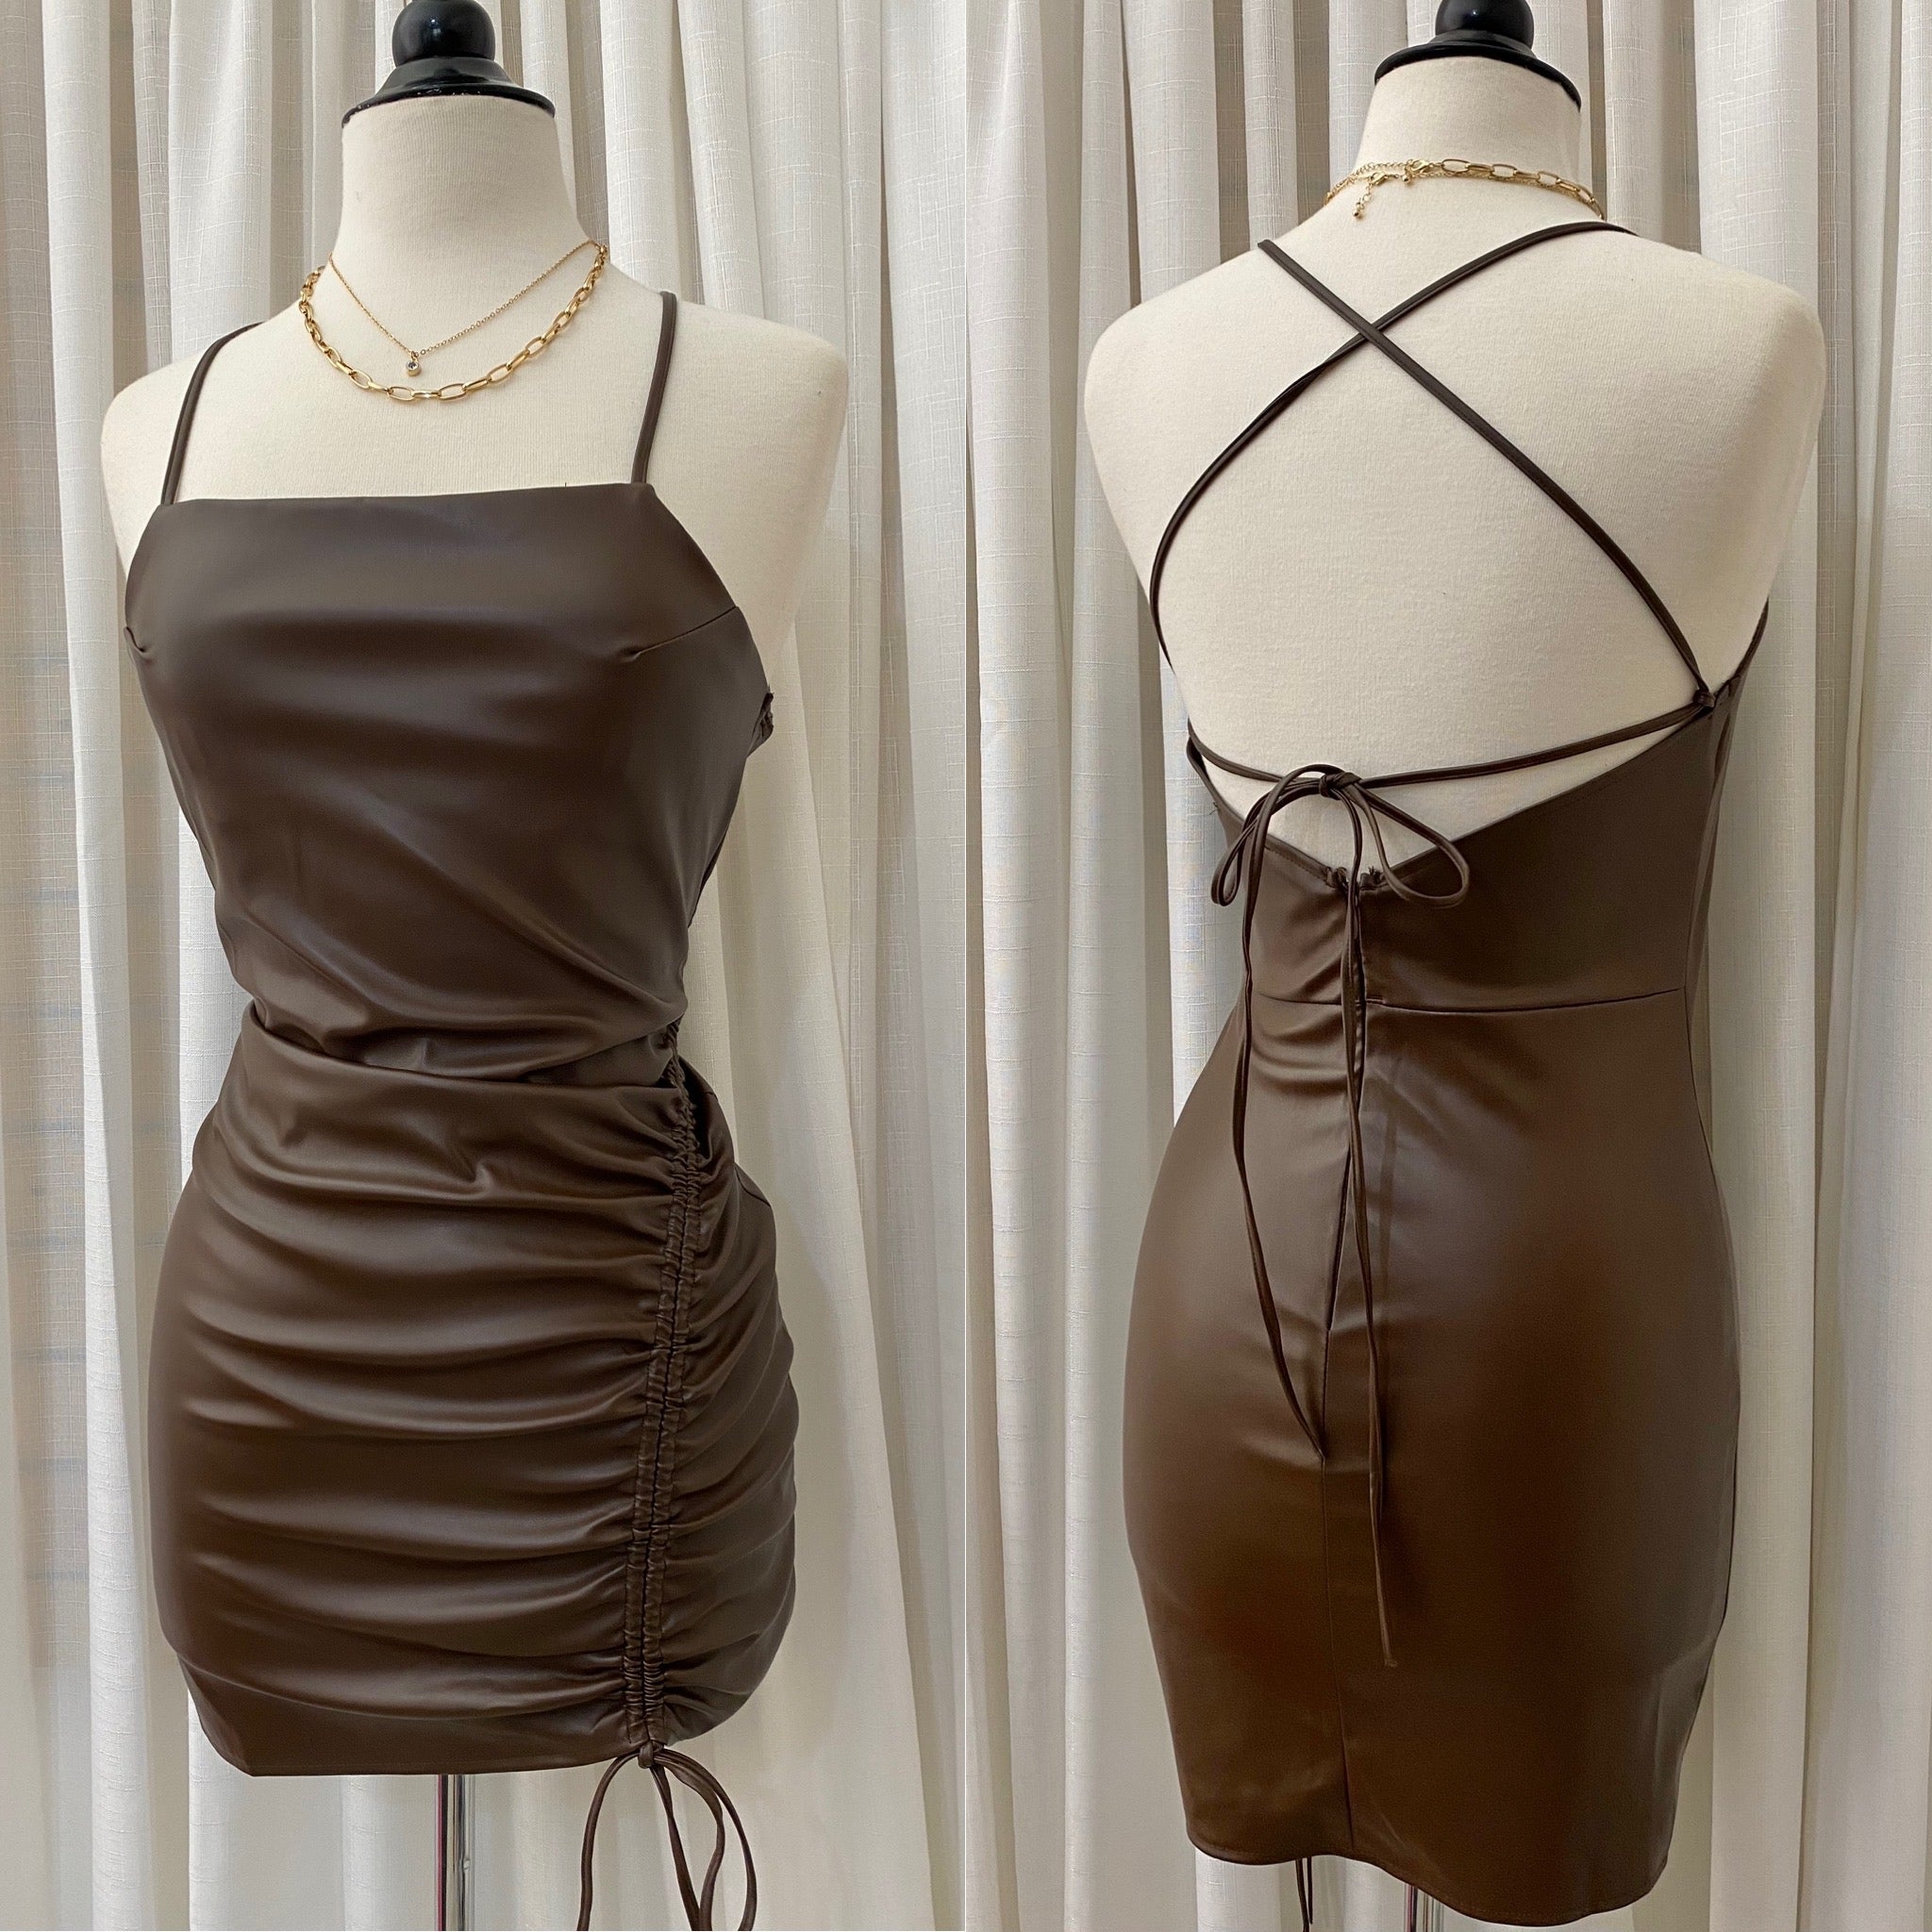 The “Fall Baddie” Faux Leather Dress